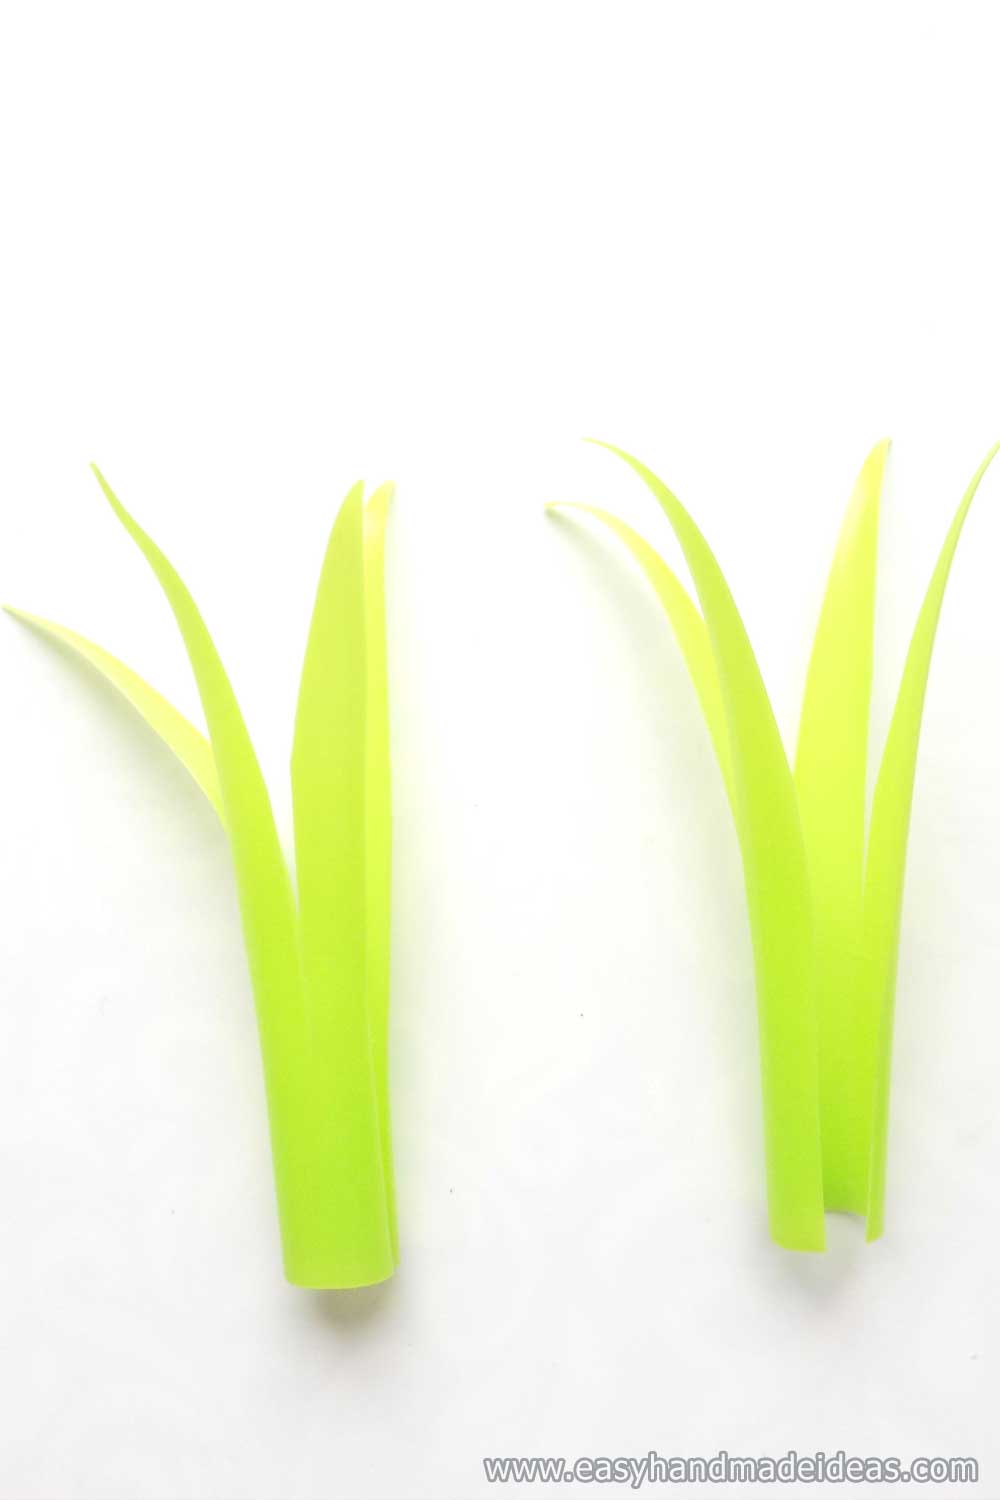 Two Pairs of Leaves from a Straw